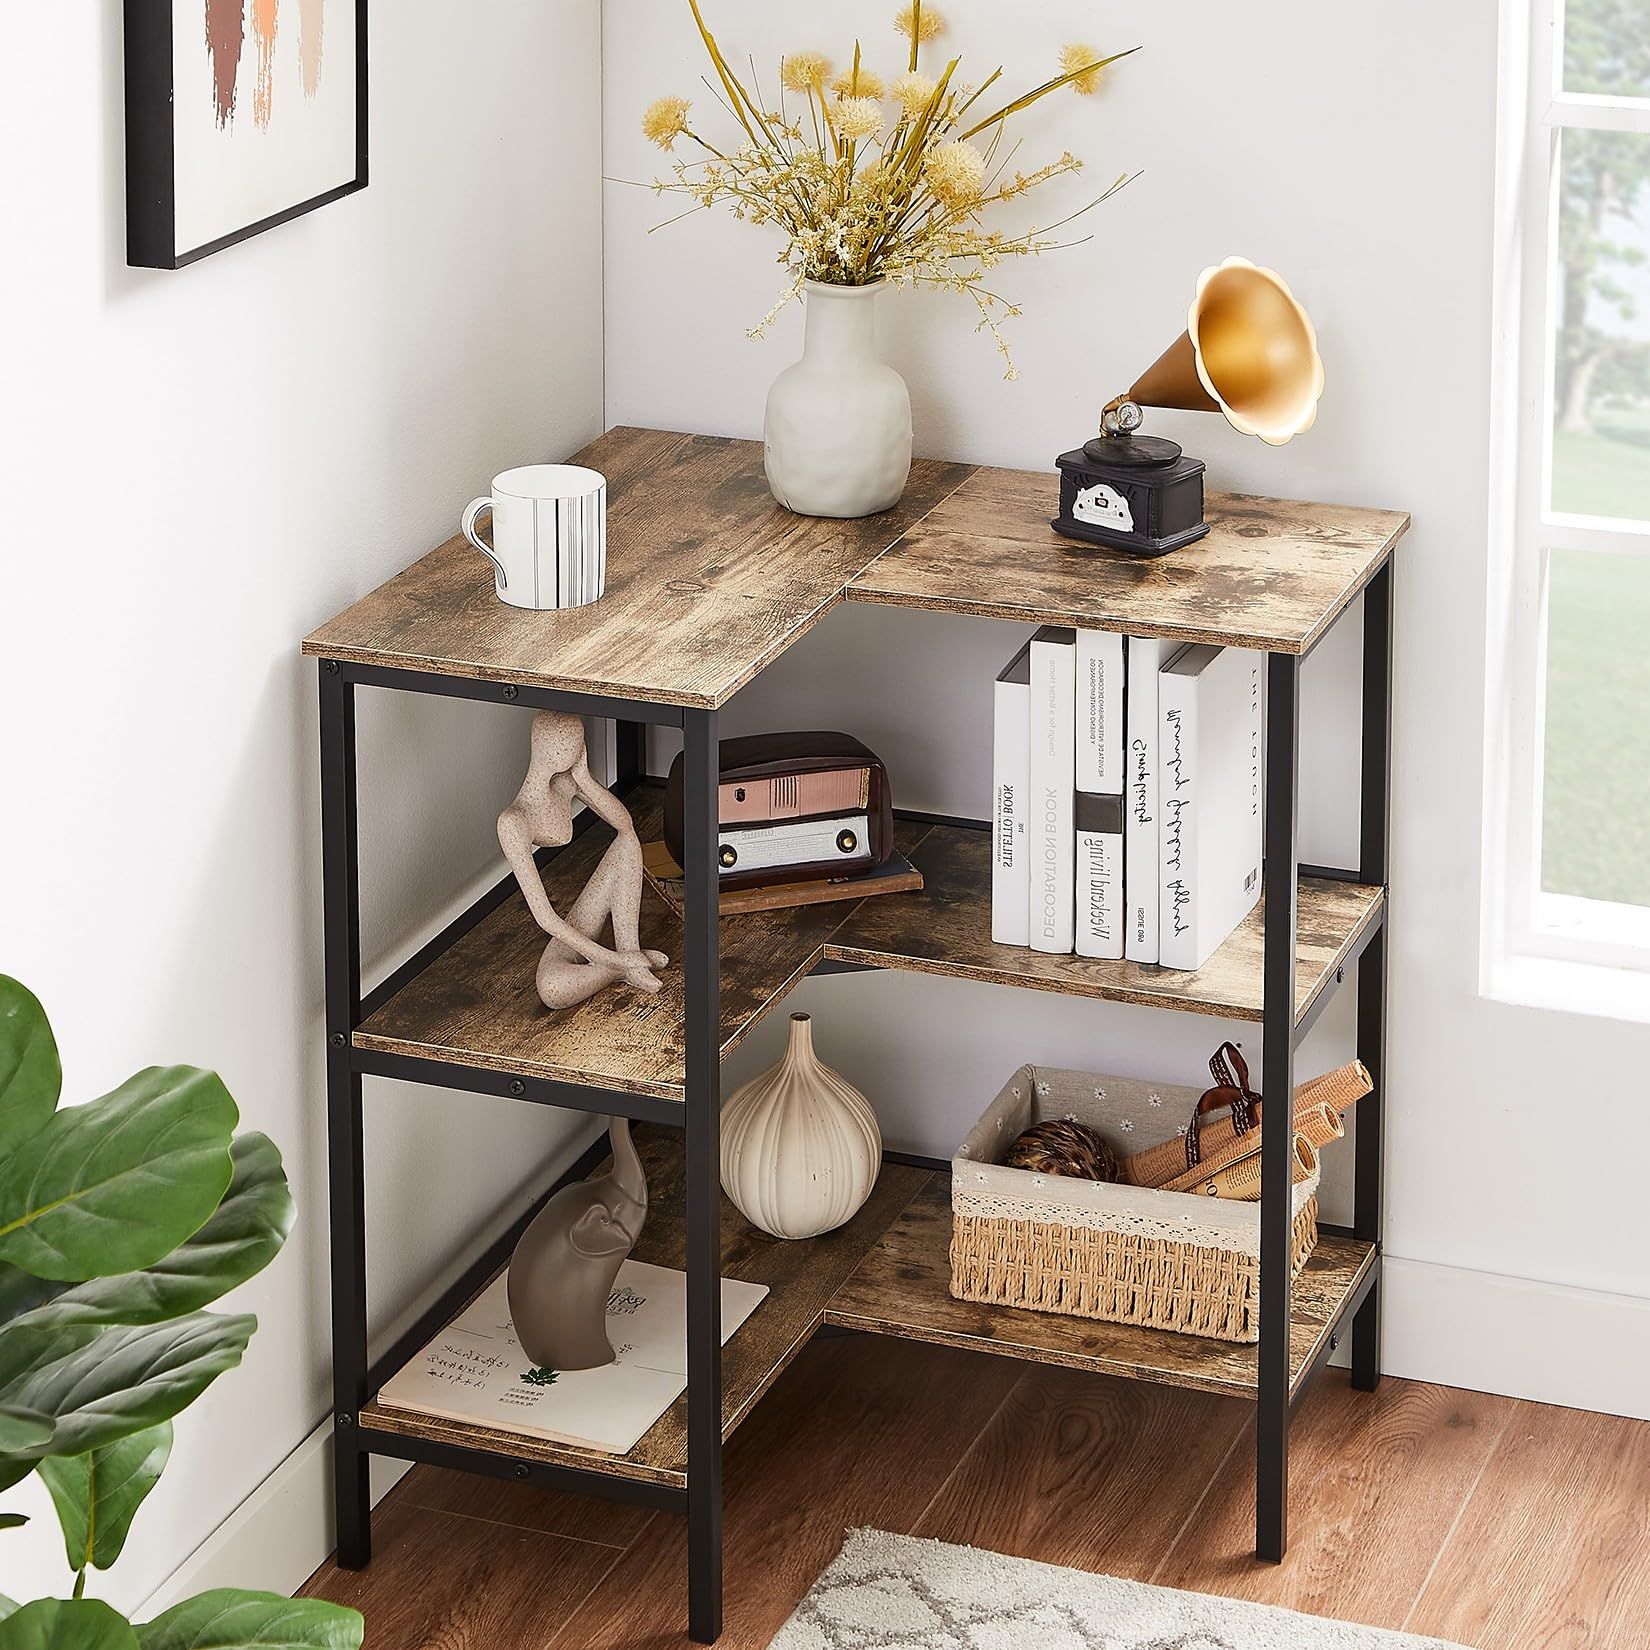 Maximize Your Living Room Space with Corner Shelf Units